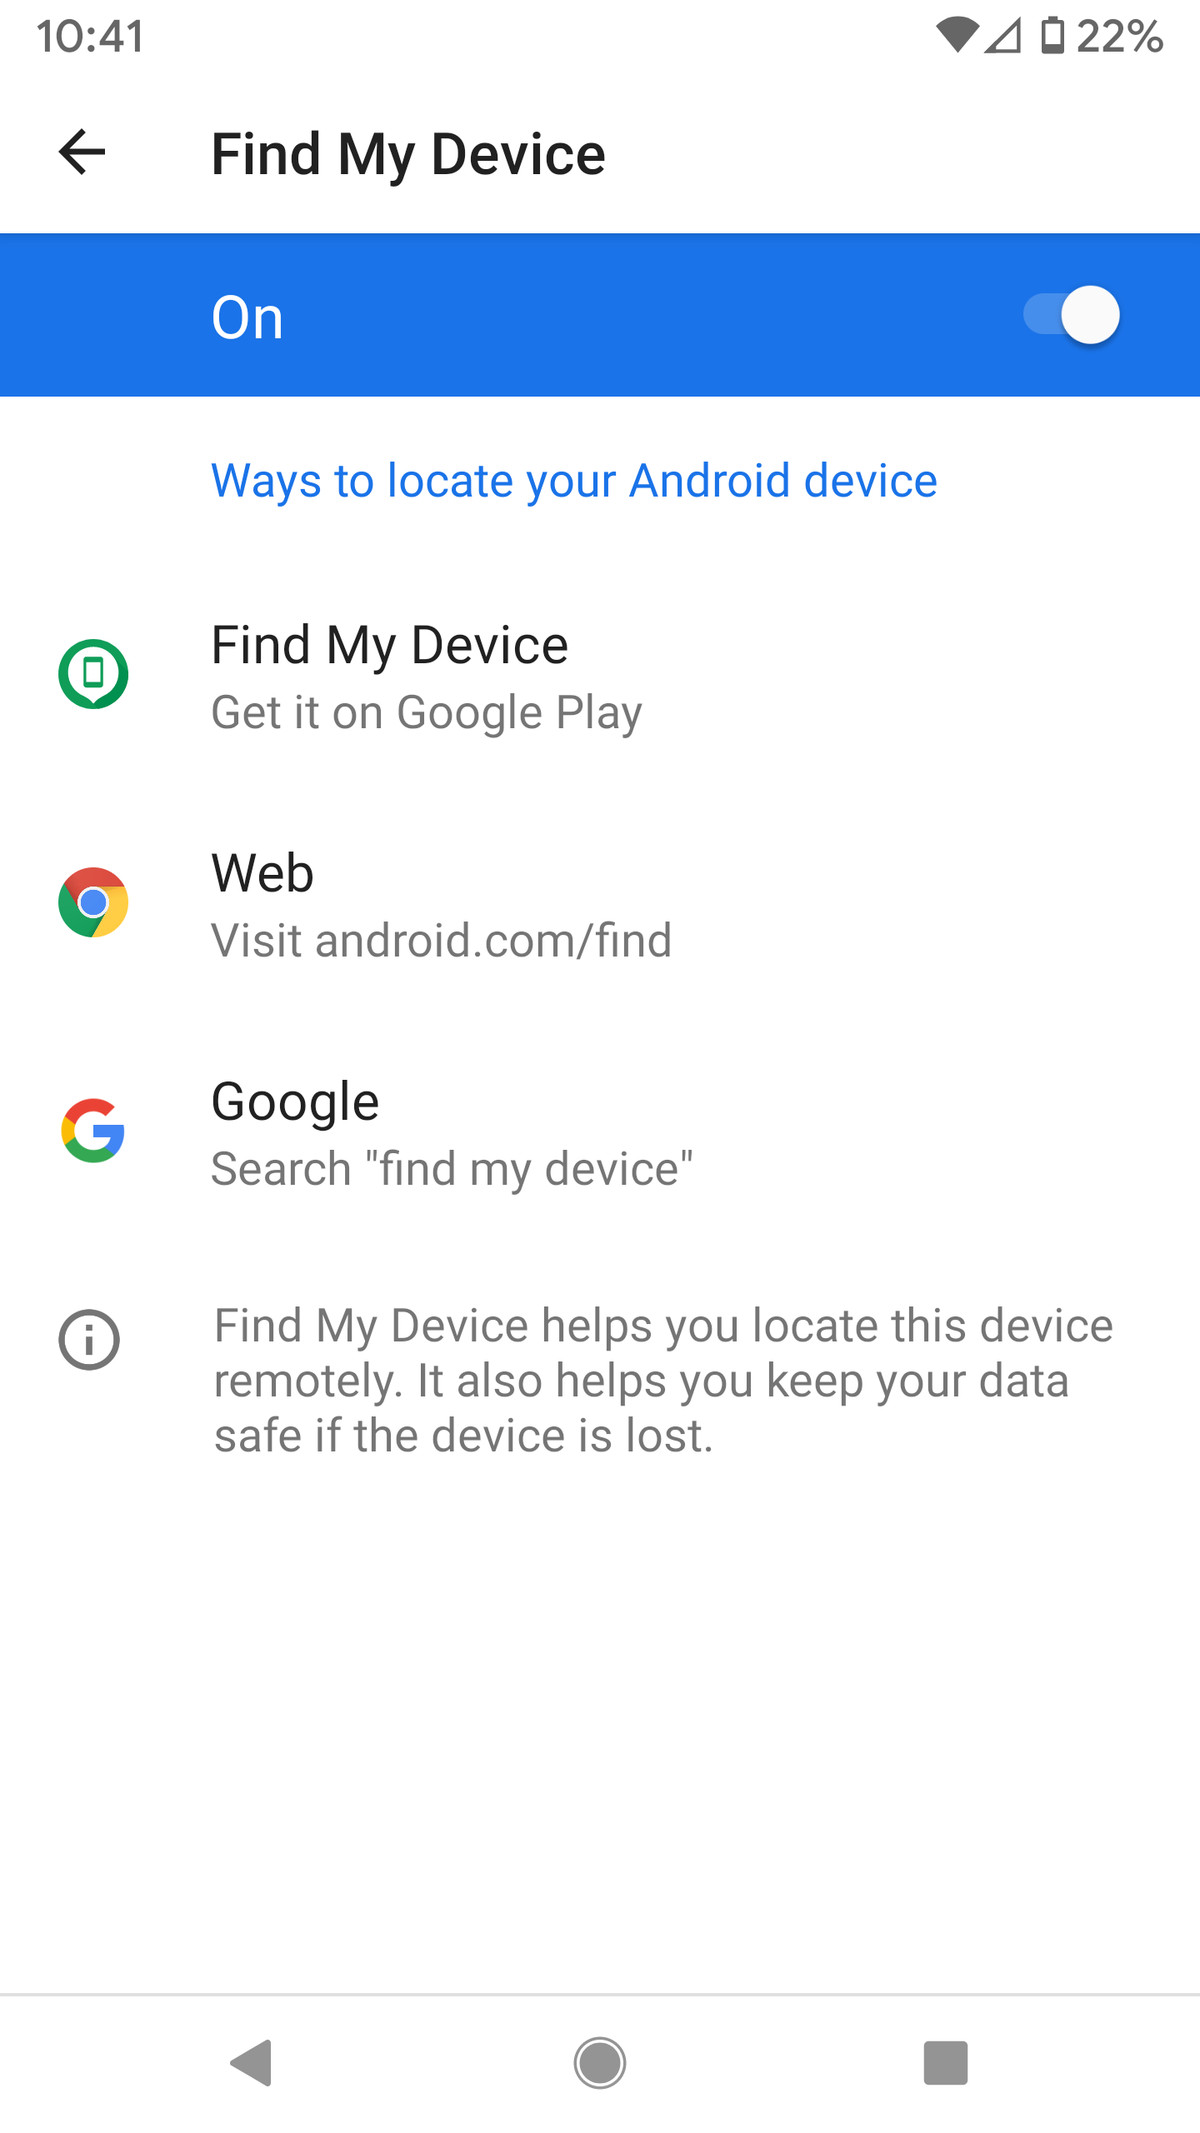 Go to Settings &gt; Security &gt; Find My Device to make sure it’s enabled.